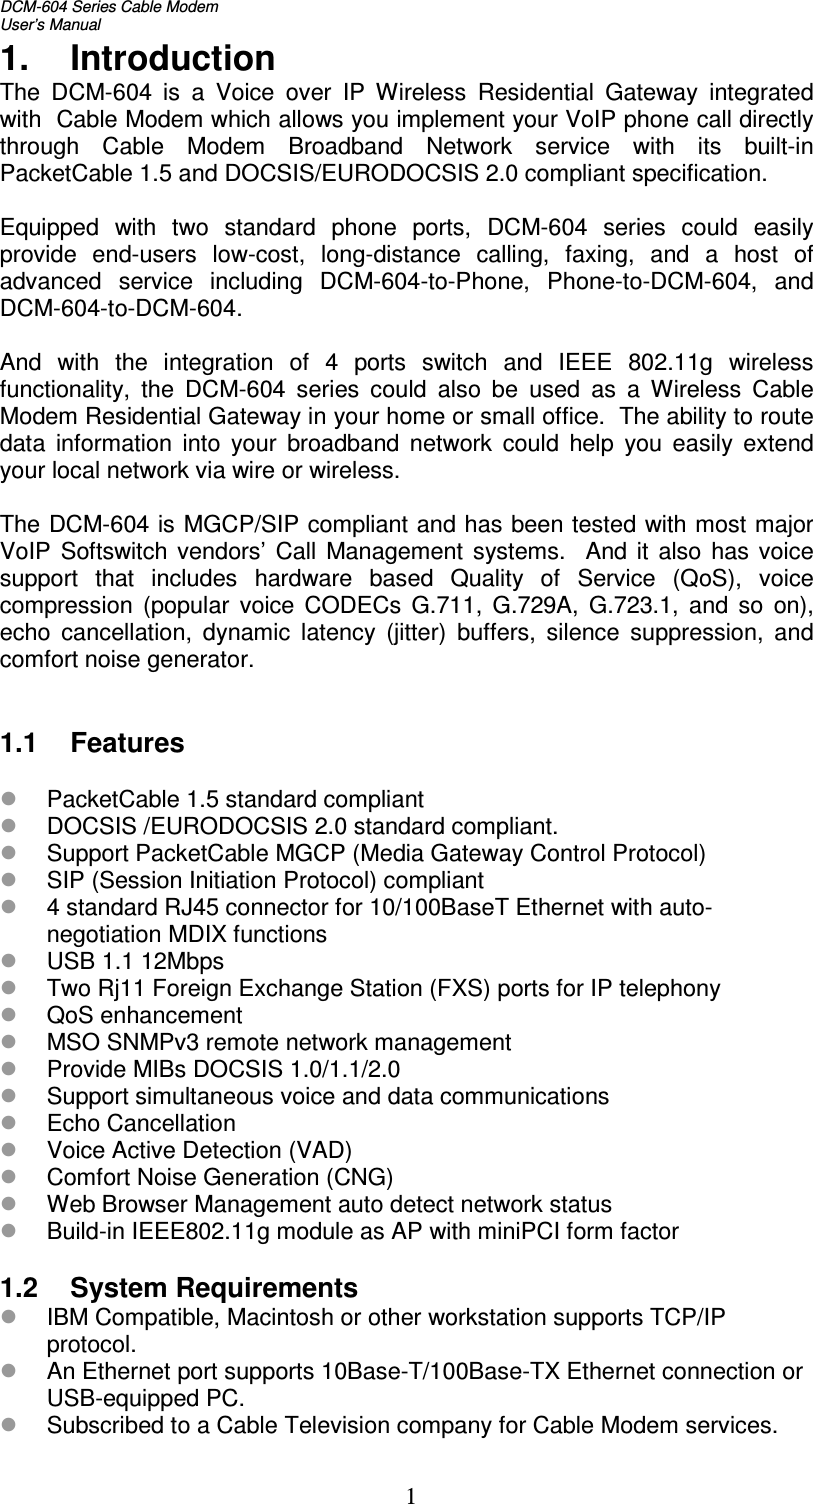 DCM-604 Series Cable Modem  User’s Manual   11.  Introduction The  DCM-604  is  a  Voice  over  IP  Wireless  Residential  Gateway  integrated with  Cable Modem which allows you implement your VoIP phone call directly through  Cable  Modem  Broadband  Network  service  with  its  built-in PacketCable 1.5 and DOCSIS/EURODOCSIS 2.0 compliant specification.  Equipped  with  two  standard  phone  ports,  DCM-604  series  could  easily provide  end-users  low-cost,  long-distance  calling,  faxing,  and  a  host  of advanced  service  including  DCM-604-to-Phone,  Phone-to-DCM-604,  and DCM-604-to-DCM-604.  And  with  the  integration  of  4  ports  switch  and  IEEE  802.11g  wireless functionality,  the  DCM-604  series  could  also  be  used  as  a  Wireless  Cable Modem Residential Gateway in your home or small office.  The ability to route data  information  into  your  broadband  network  could  help  you  easily  extend your local network via wire or wireless.  The DCM-604 is MGCP/SIP compliant and has been tested with most major VoIP  Softswitch  vendors’  Call  Management  systems.    And it  also  has  voice support  that  includes  hardware  based  Quality  of  Service  (QoS),  voice compression  (popular  voice  CODECs  G.711,  G.729A,  G.723.1,  and  so  on), echo  cancellation,  dynamic  latency  (jitter)  buffers,  silence  suppression,  and comfort noise generator.   1.1  Features   PacketCable 1.5 standard compliant  DOCSIS /EURODOCSIS 2.0 standard compliant.  Support PacketCable MGCP (Media Gateway Control Protocol)  SIP (Session Initiation Protocol) compliant  4 standard RJ45 connector for 10/100BaseT Ethernet with auto-negotiation MDIX functions  USB 1.1 12Mbps  Two Rj11 Foreign Exchange Station (FXS) ports for IP telephony  QoS enhancement  MSO SNMPv3 remote network management  Provide MIBs DOCSIS 1.0/1.1/2.0  Support simultaneous voice and data communications  Echo Cancellation  Voice Active Detection (VAD)  Comfort Noise Generation (CNG)  Web Browser Management auto detect network status  Build-in IEEE802.11g module as AP with miniPCI form factor  1.2  System Requirements  IBM Compatible, Macintosh or other workstation supports TCP/IP protocol.  An Ethernet port supports 10Base-T/100Base-TX Ethernet connection or USB-equipped PC.  Subscribed to a Cable Television company for Cable Modem services. 